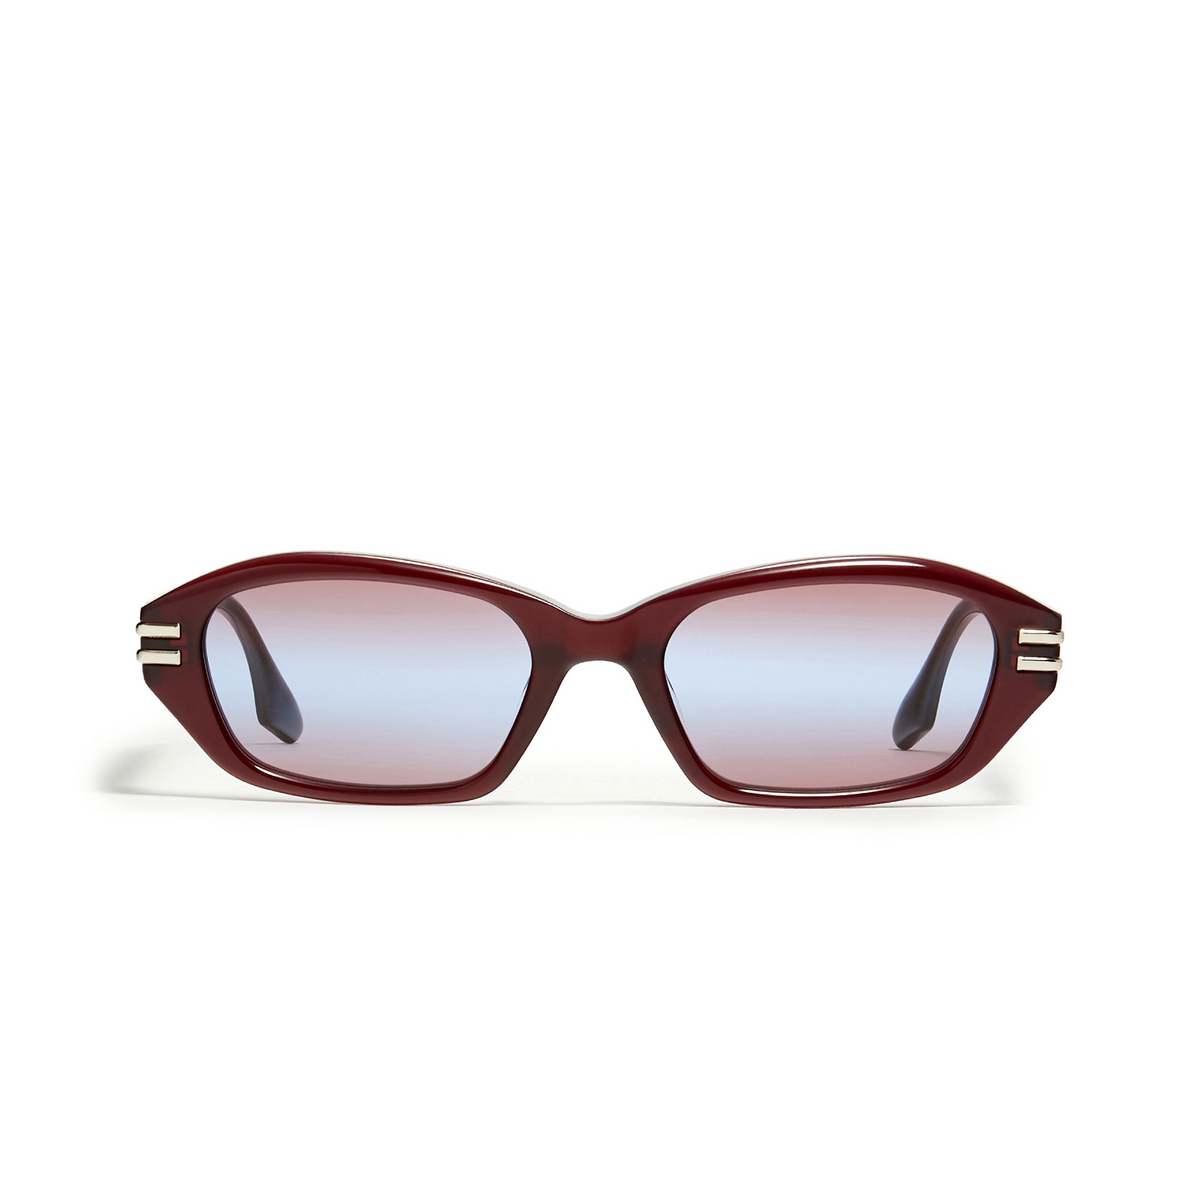 Gentle Monster® Irregular Sunglasses: Deck color Red RC3 - front view.